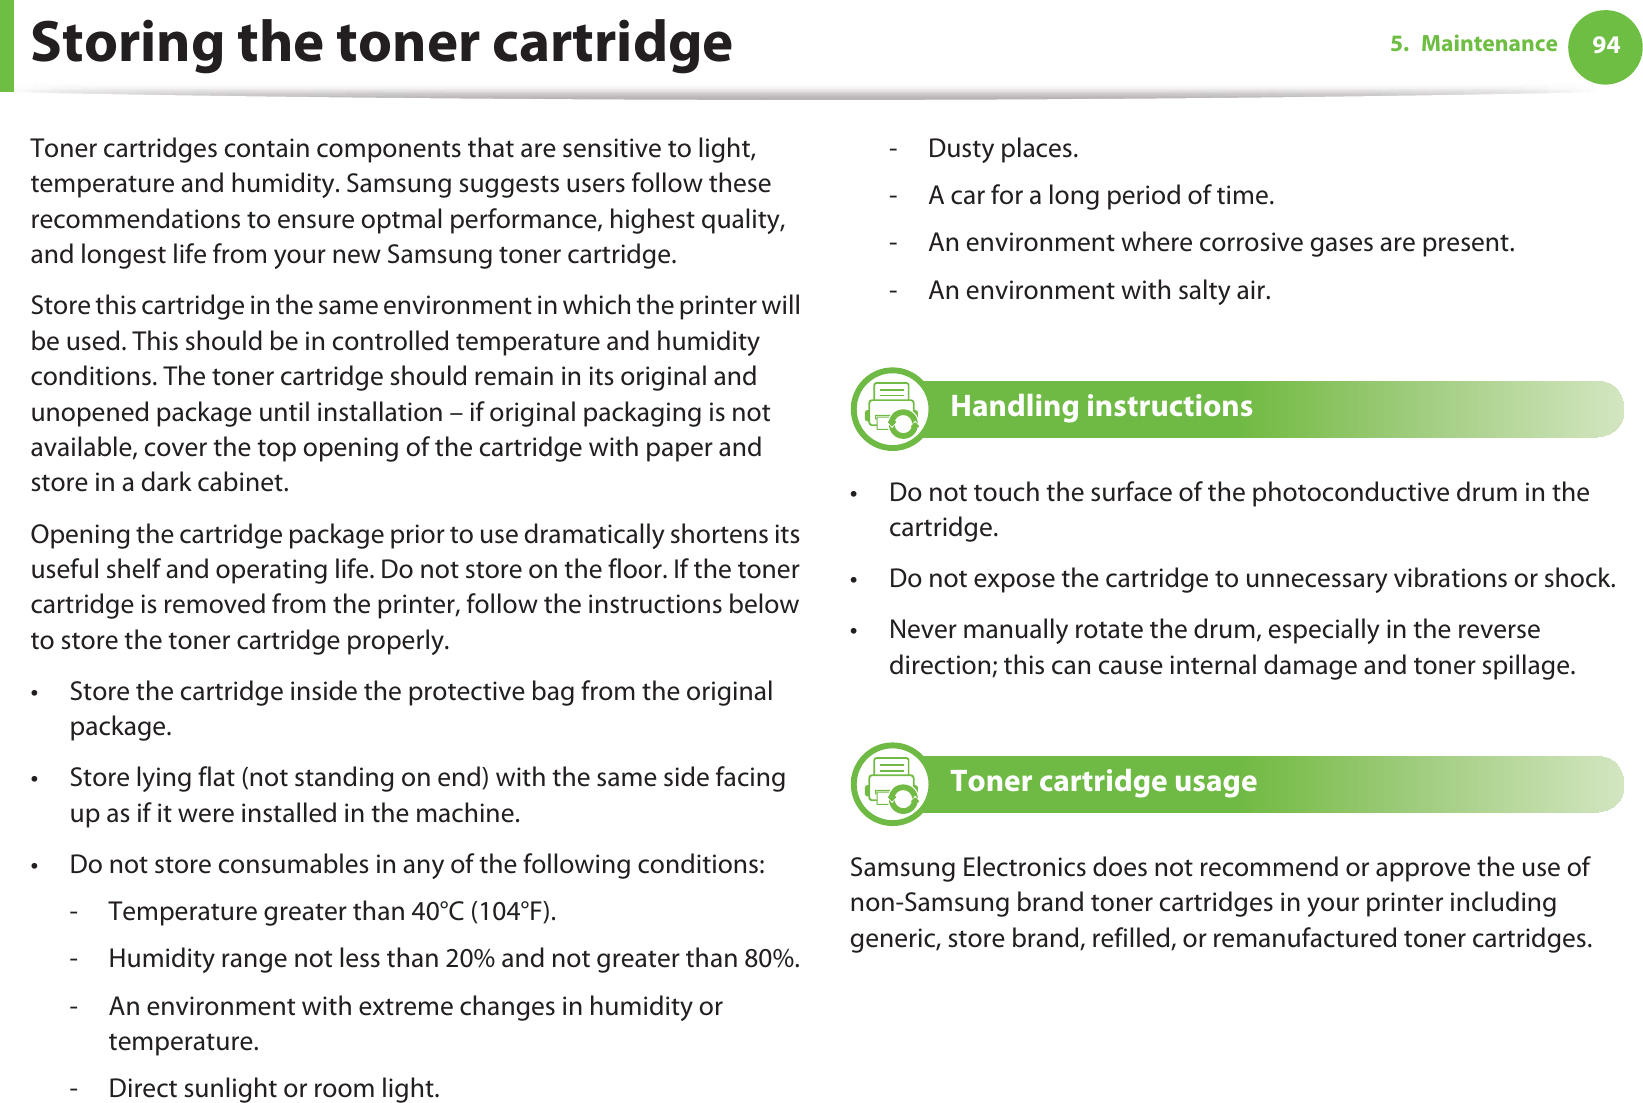 945. MaintenanceStoring the toner cartridgeToner cartridges contain components that are sensitive to light, temperature and humidity. Samsung suggests users follow these recommendations to ensure optmal performance, highest quality, and longest life from your new Samsung toner cartridge.Store this cartridge in the same environment in which the printer will be used. This should be in controlled temperature and humidity conditions. The toner cartridge should remain in its original and unopened package until installation – if original packaging is not available, cover the top opening of the cartridge with paper and store in a dark cabinet.Opening the cartridge package prior to use dramatically shortens its useful shelf and operating life. Do not store on the floor. If the toner cartridge is removed from the printer, follow the instructions below to store the toner cartridge properly.• Store the cartridge inside the protective bag from the original package. • Store lying flat (not standing on end) with the same side facing up as if it were installed in the machine.• Do not store consumables in any of the following conditions:- Temperature greater than 40°C (104°F).- Humidity range not less than 20% and not greater than 80%.- An environment with extreme changes in humidity or temperature.- Direct sunlight or room light.-Dusty places.- A car for a long period of time.- An environment where corrosive gases are present.- An environment with salty air.1 Handling instructions• Do not touch the surface of the photoconductive drum in the cartridge.• Do not expose the cartridge to unnecessary vibrations or shock.• Never manually rotate the drum, especially in the reverse direction; this can cause internal damage and toner spillage.2 Toner cartridge usageSamsung Electronics does not recommend or approve the use of non-Samsung brand toner cartridges in your printer including generic, store brand, refilled, or remanufactured toner cartridges.